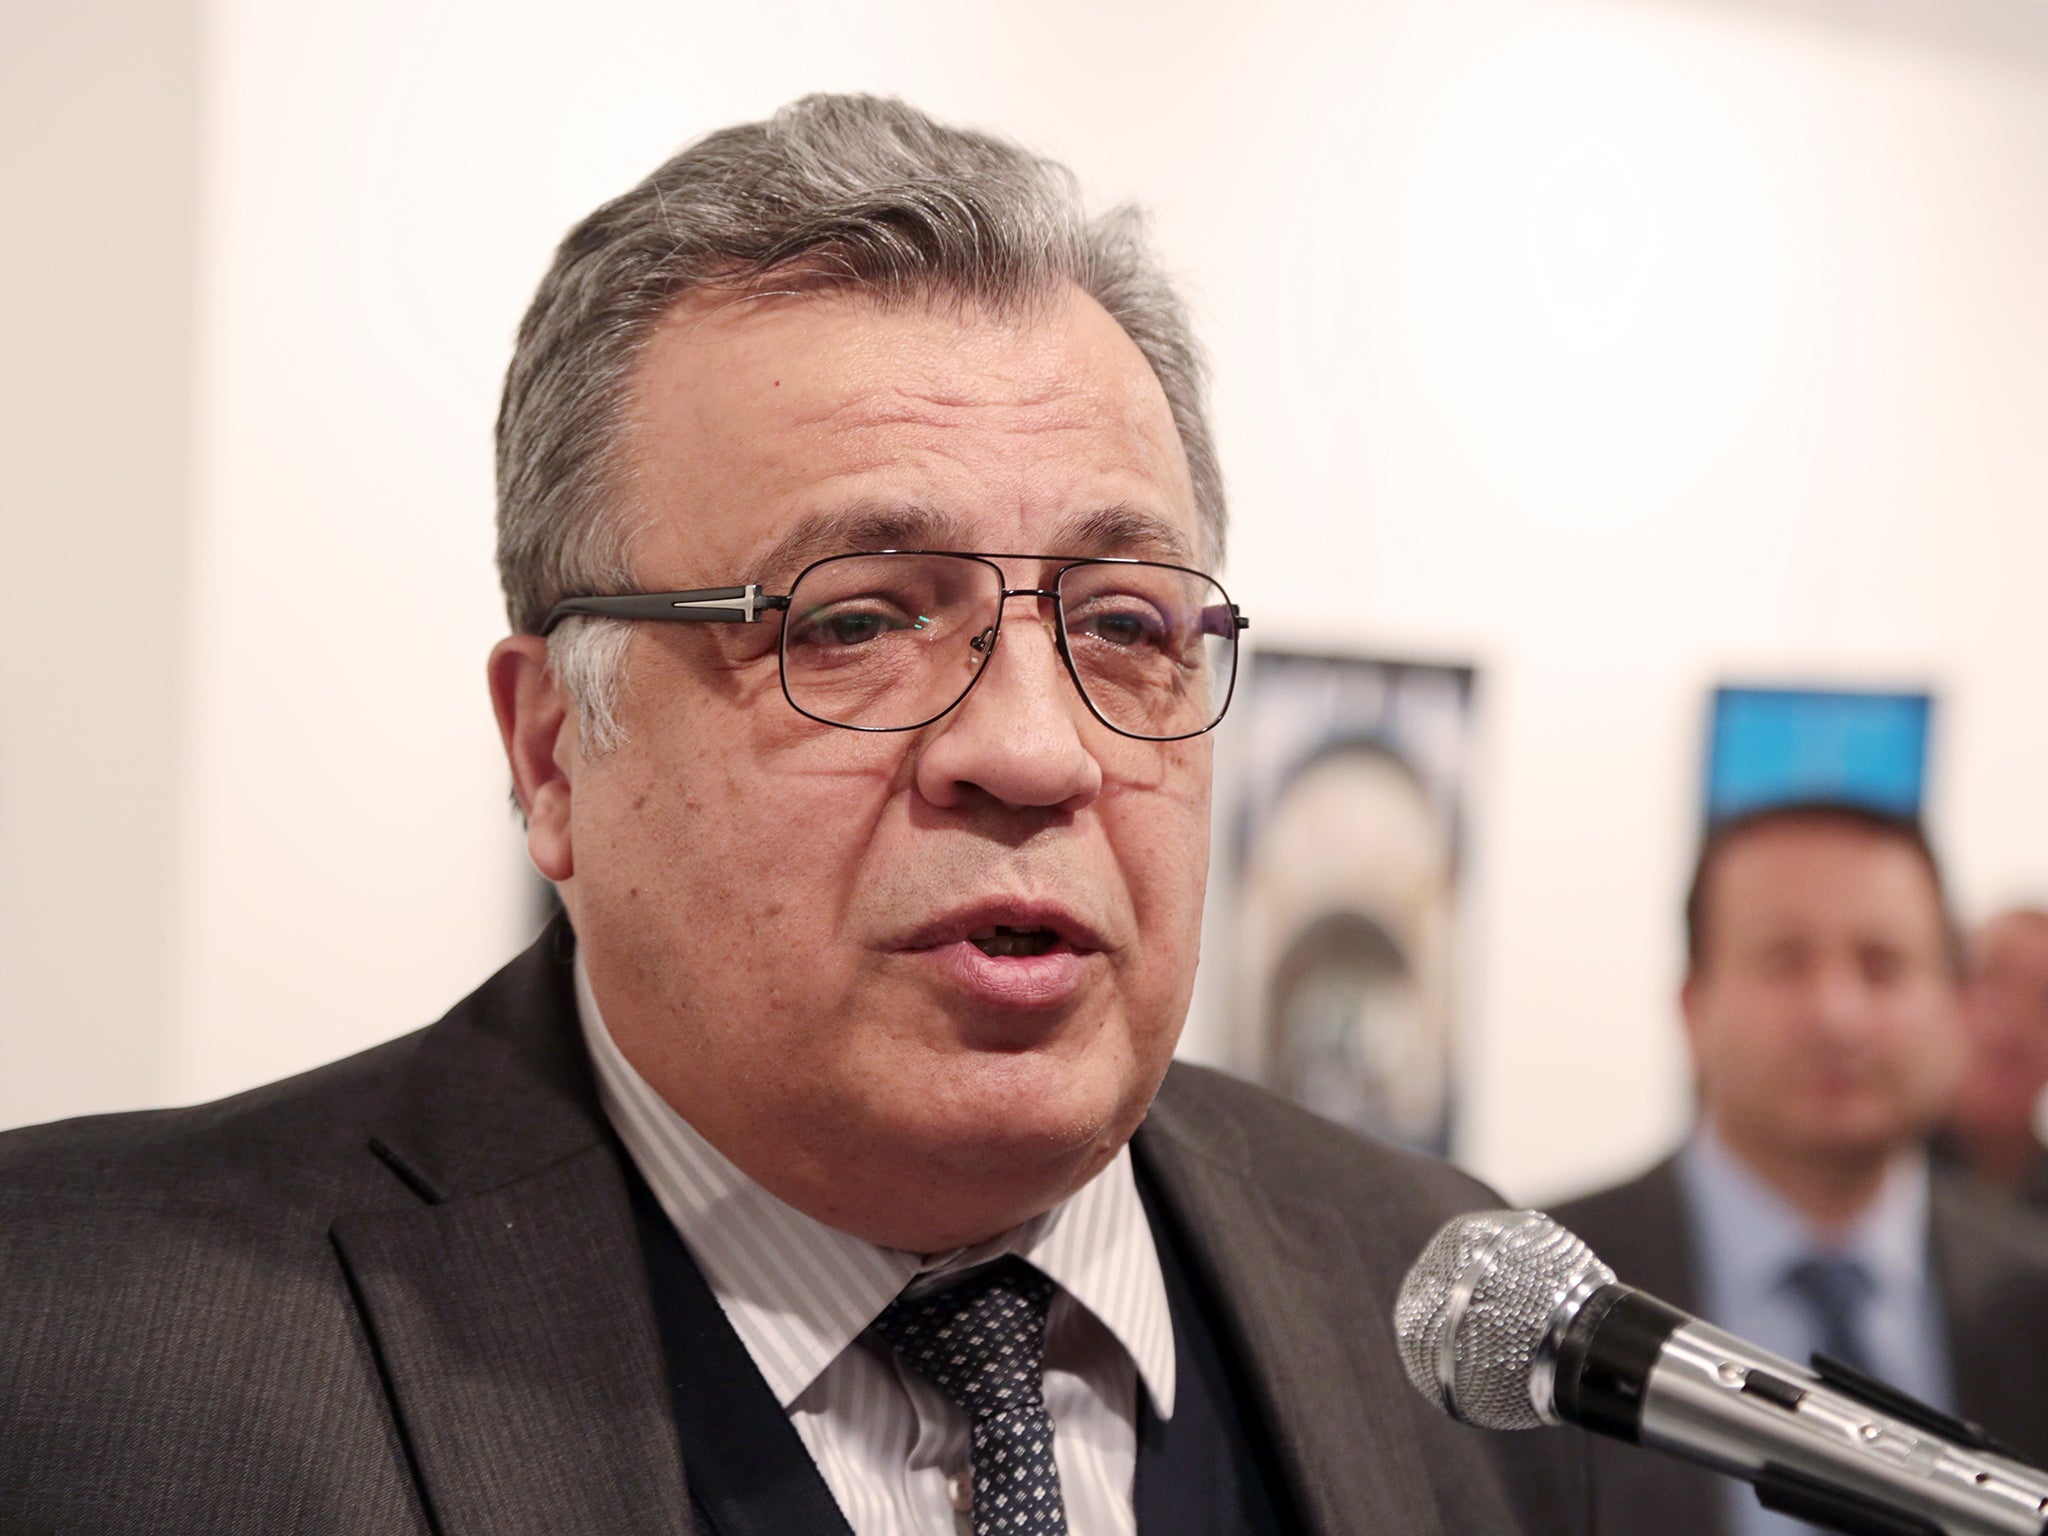 Russian Ambassador to Turkey Andrei Karlov was delivering a speech when the gunman opened fire